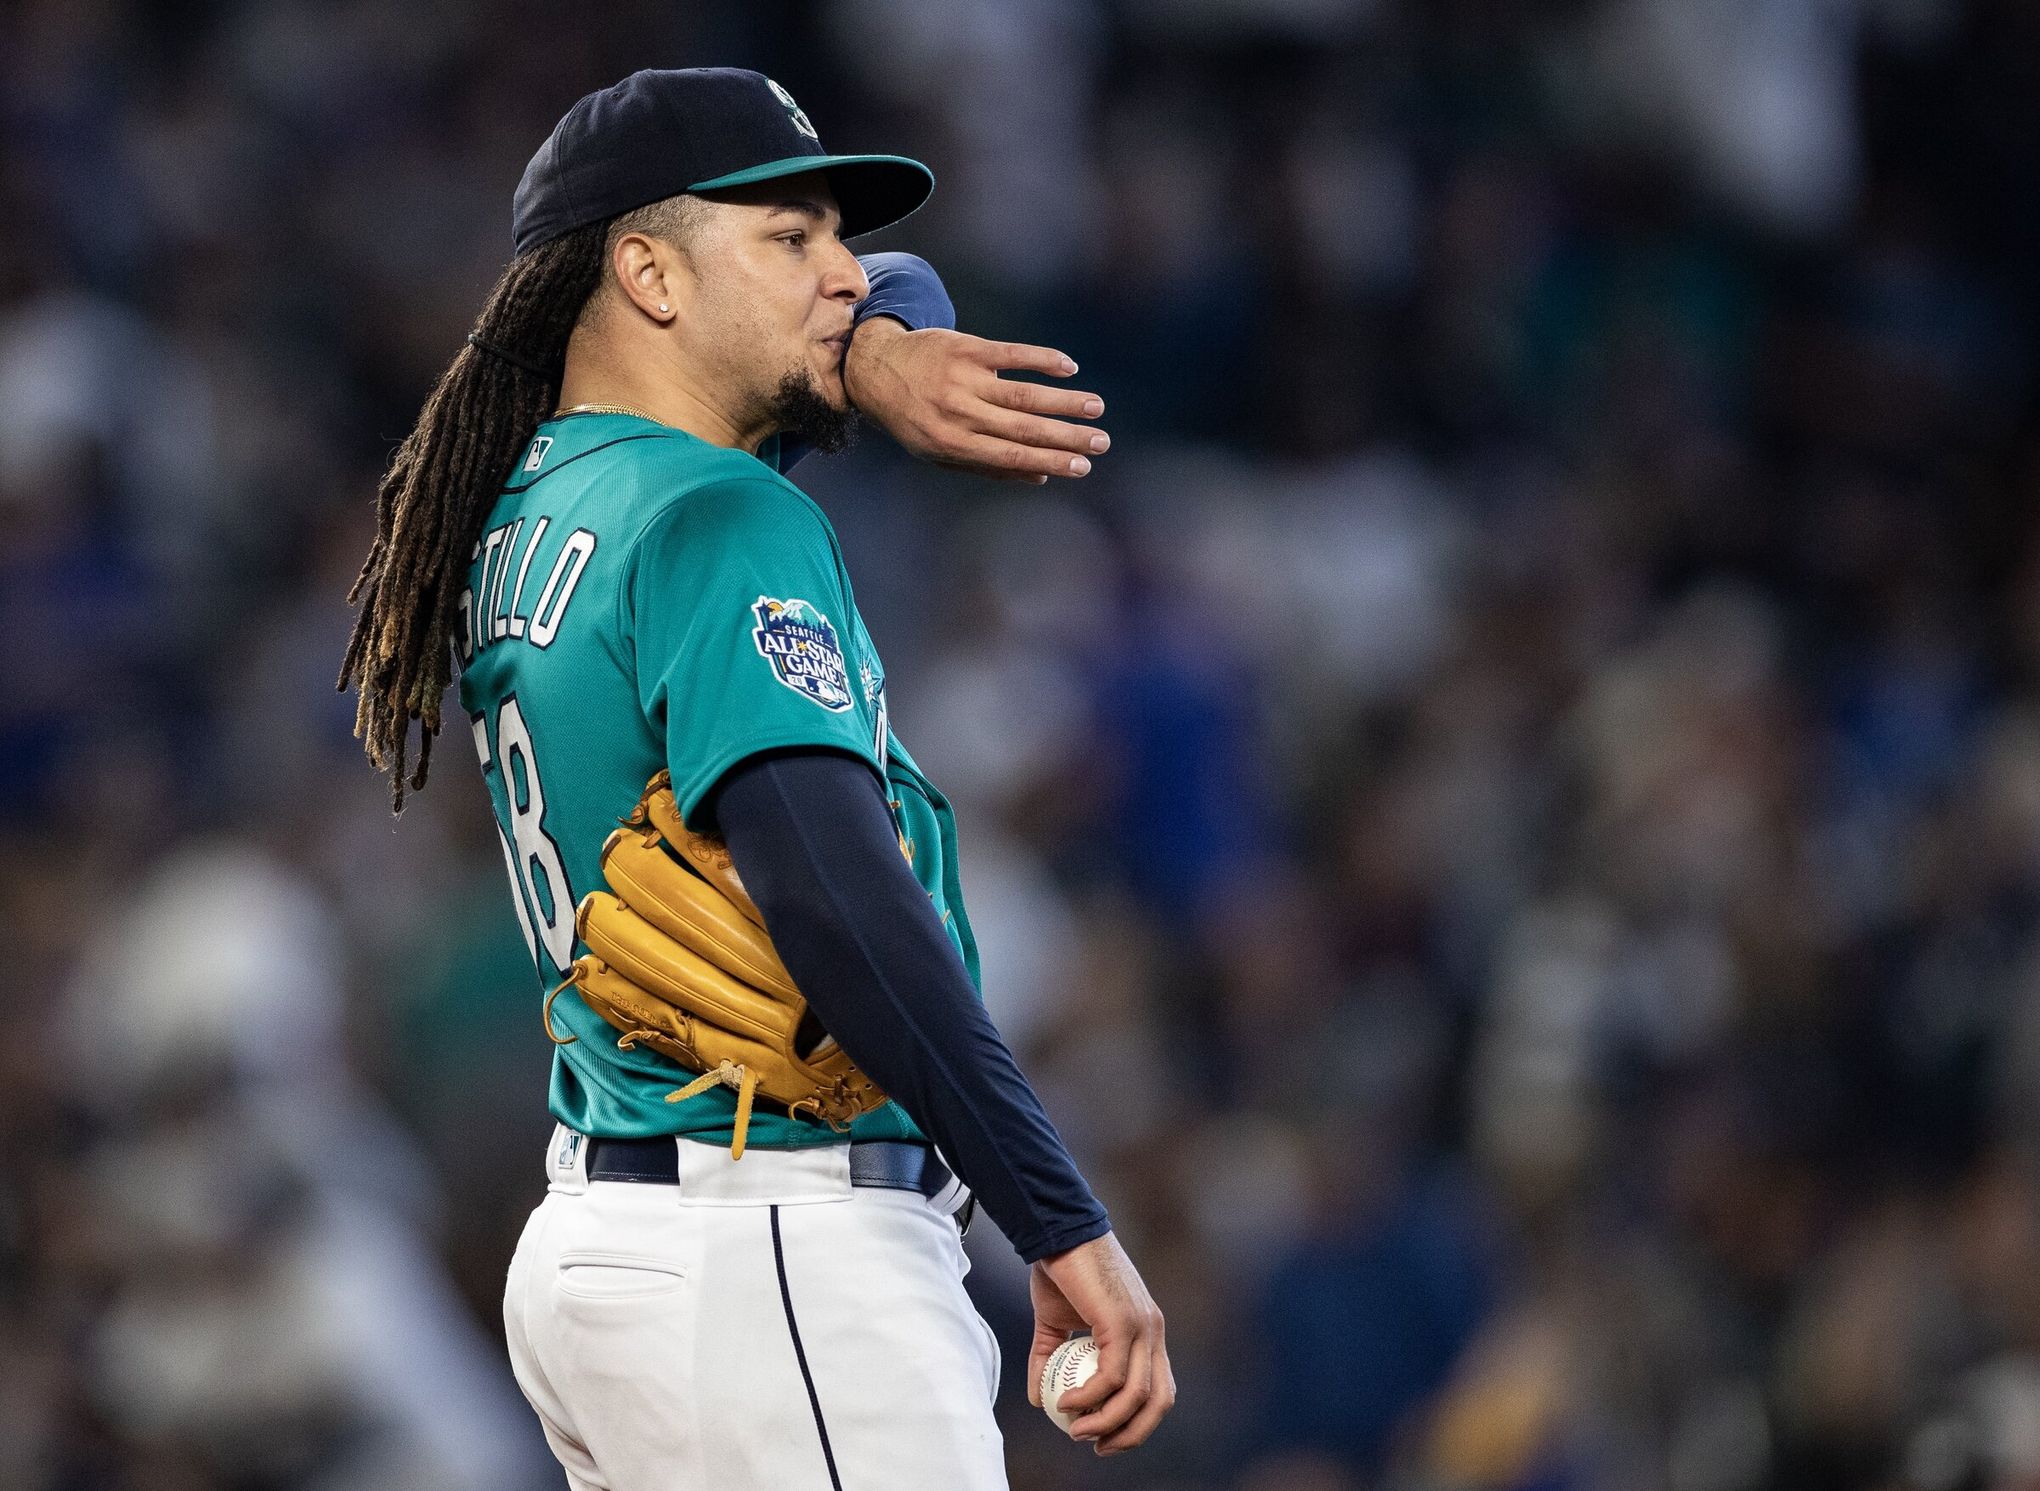 Seattle Mariners' 21-year playoff drought ends with Cal Raleigh's